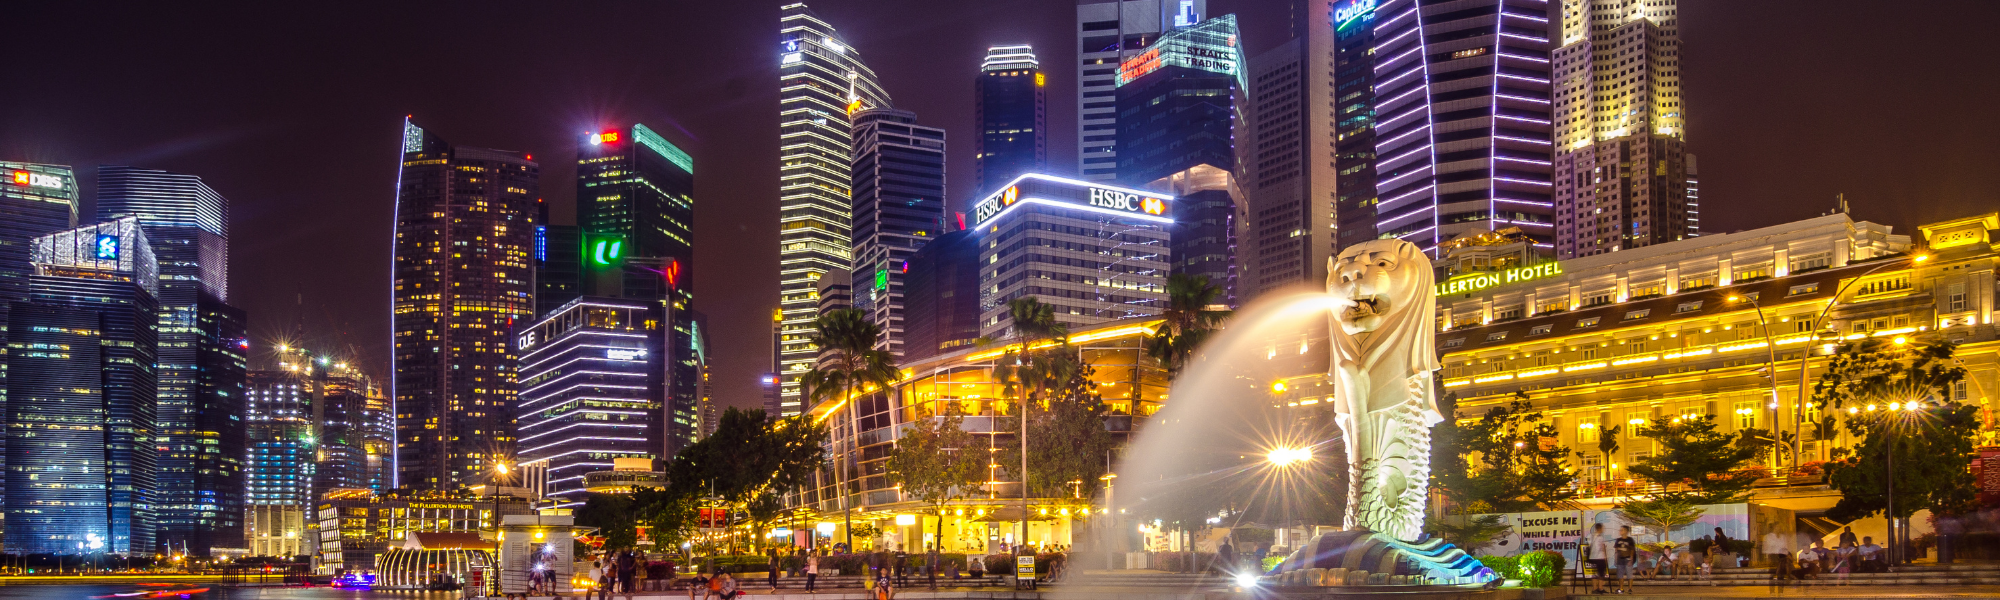 A Pilot's guide to living and working in Singapore